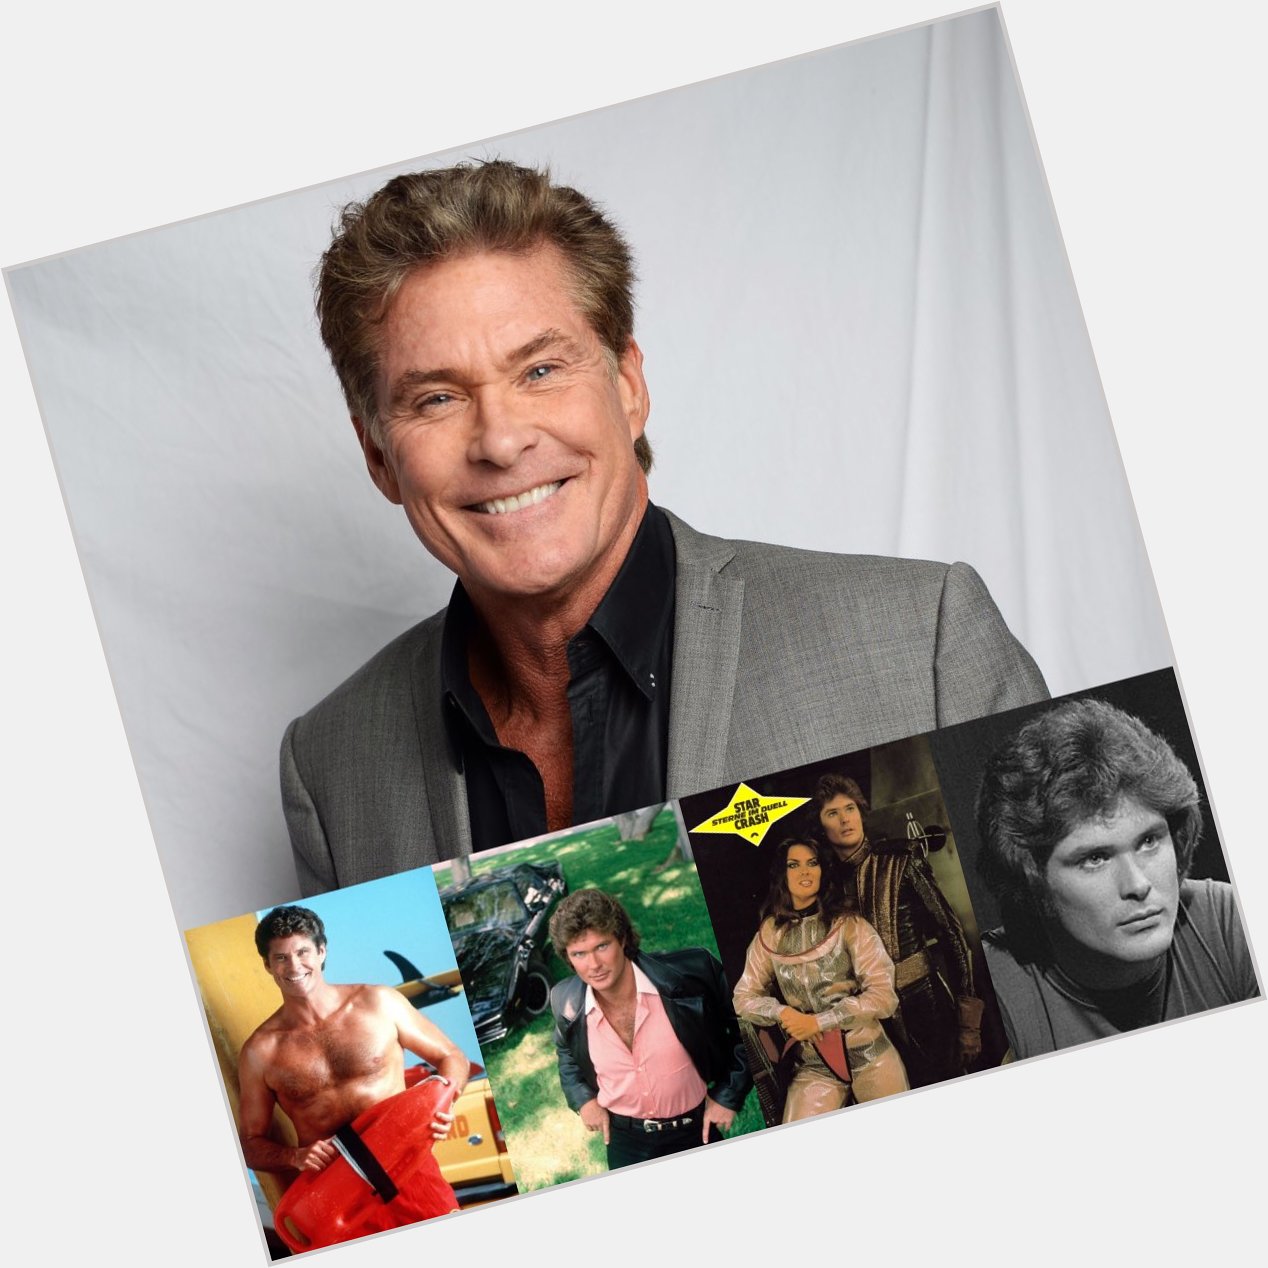 Happy birthday to American actor, singer, producer, and businessman David Hasselhoff, born July 17, 1952. 